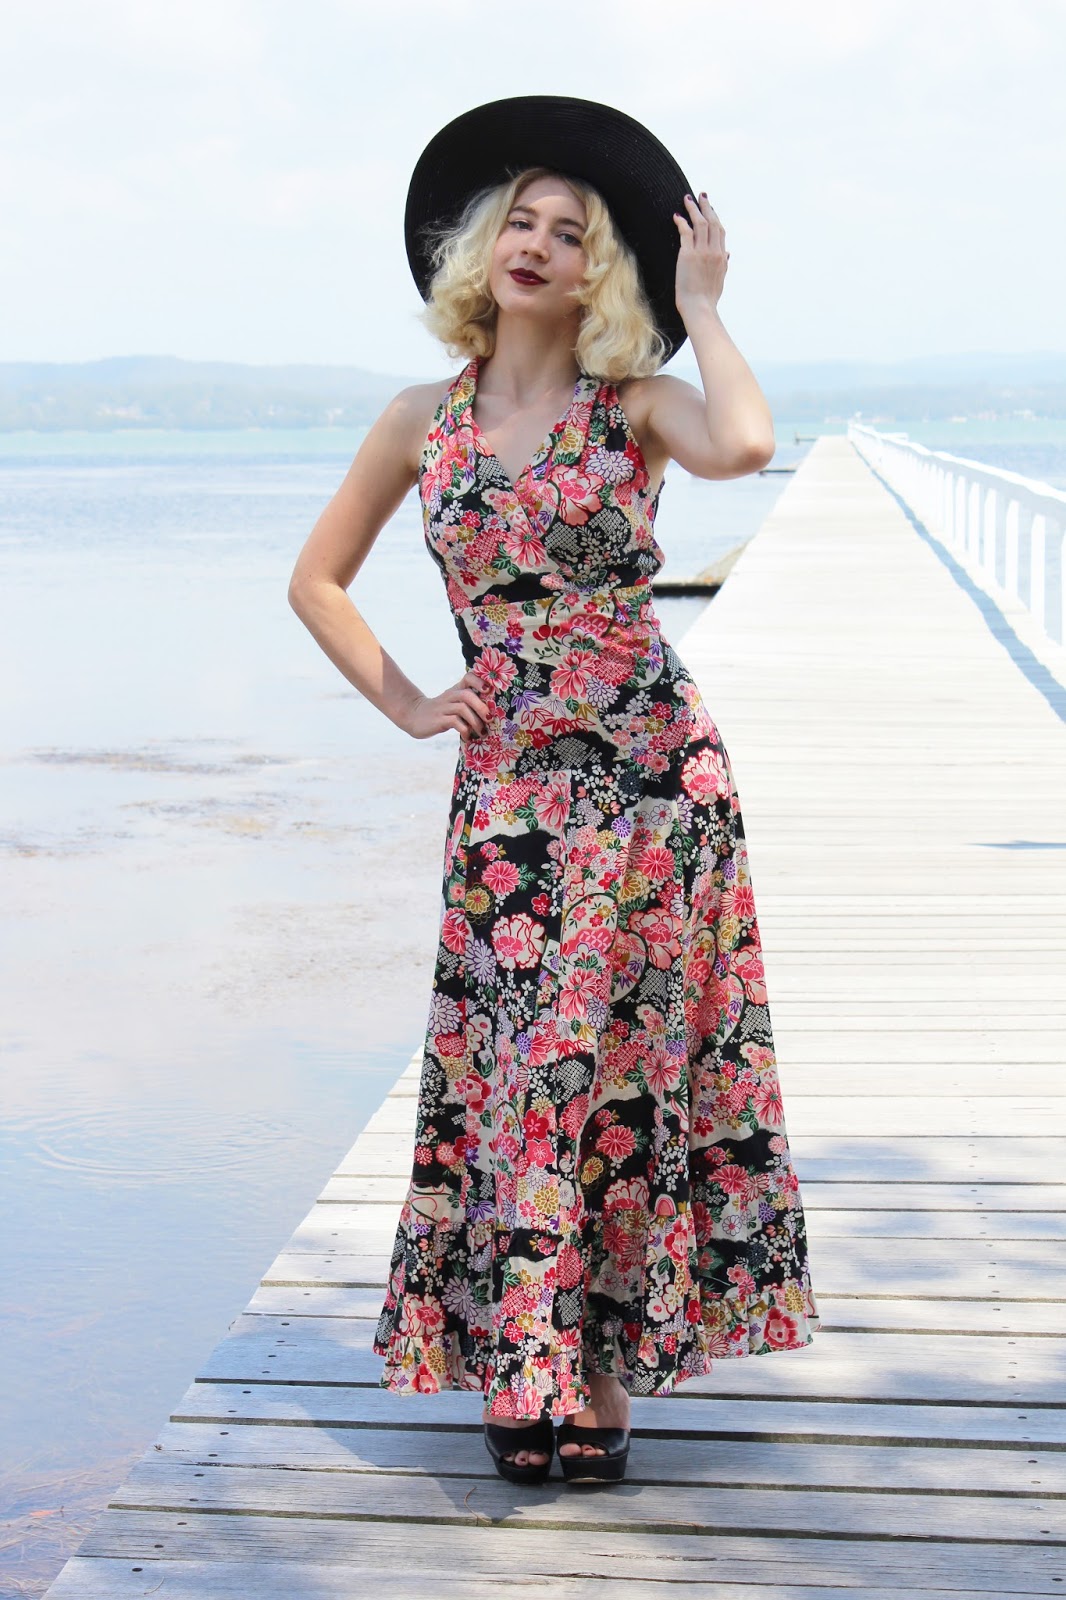 The Jetty | GracefullyVintage